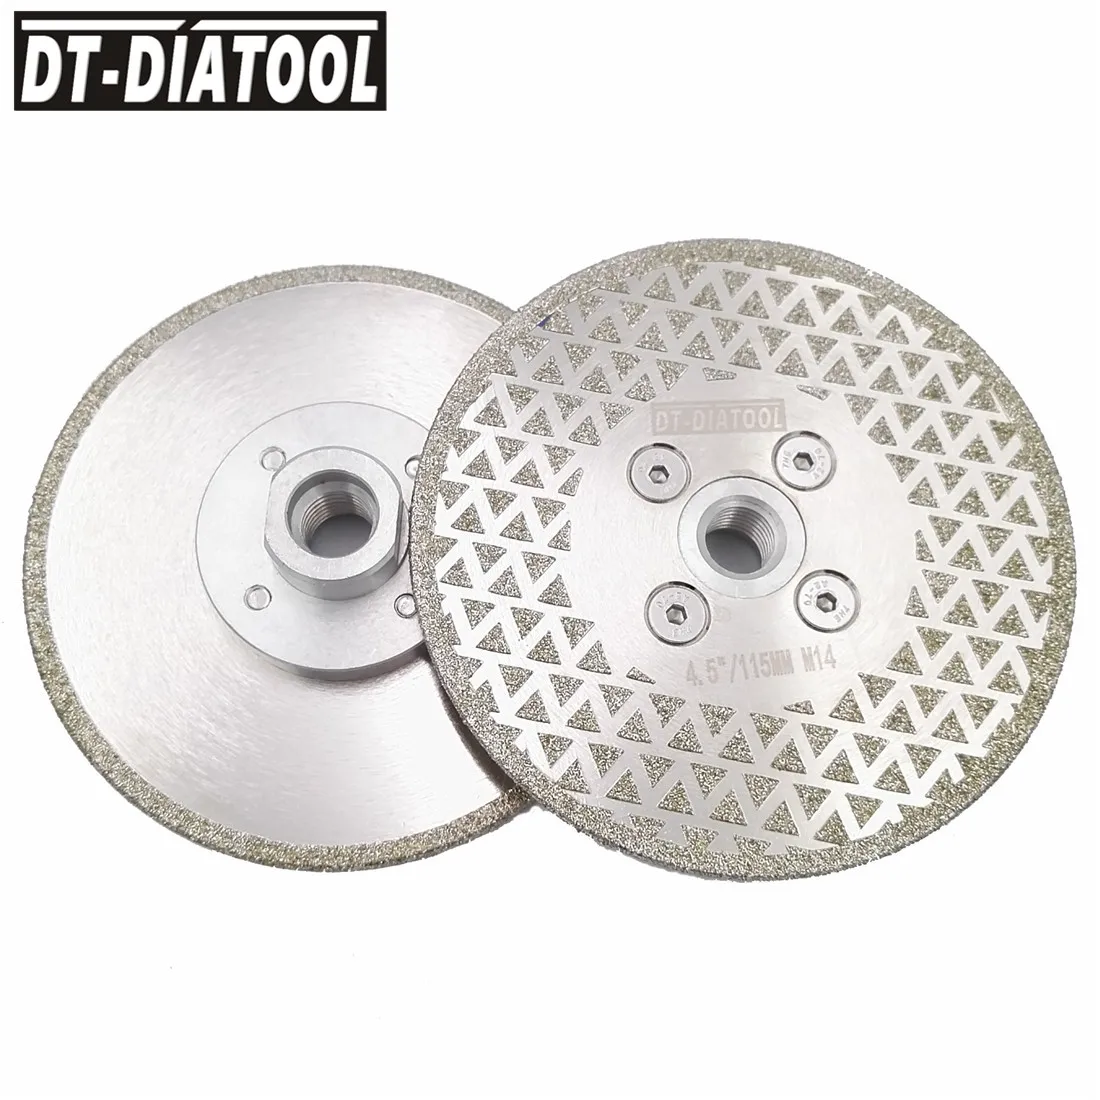 

DT-DIATOOL 2pcs M14 Thread 115mm/4.5" Single Side Coated Diamond Saw Blade Electroplated Cutting & Grinding Disc Granite Marble